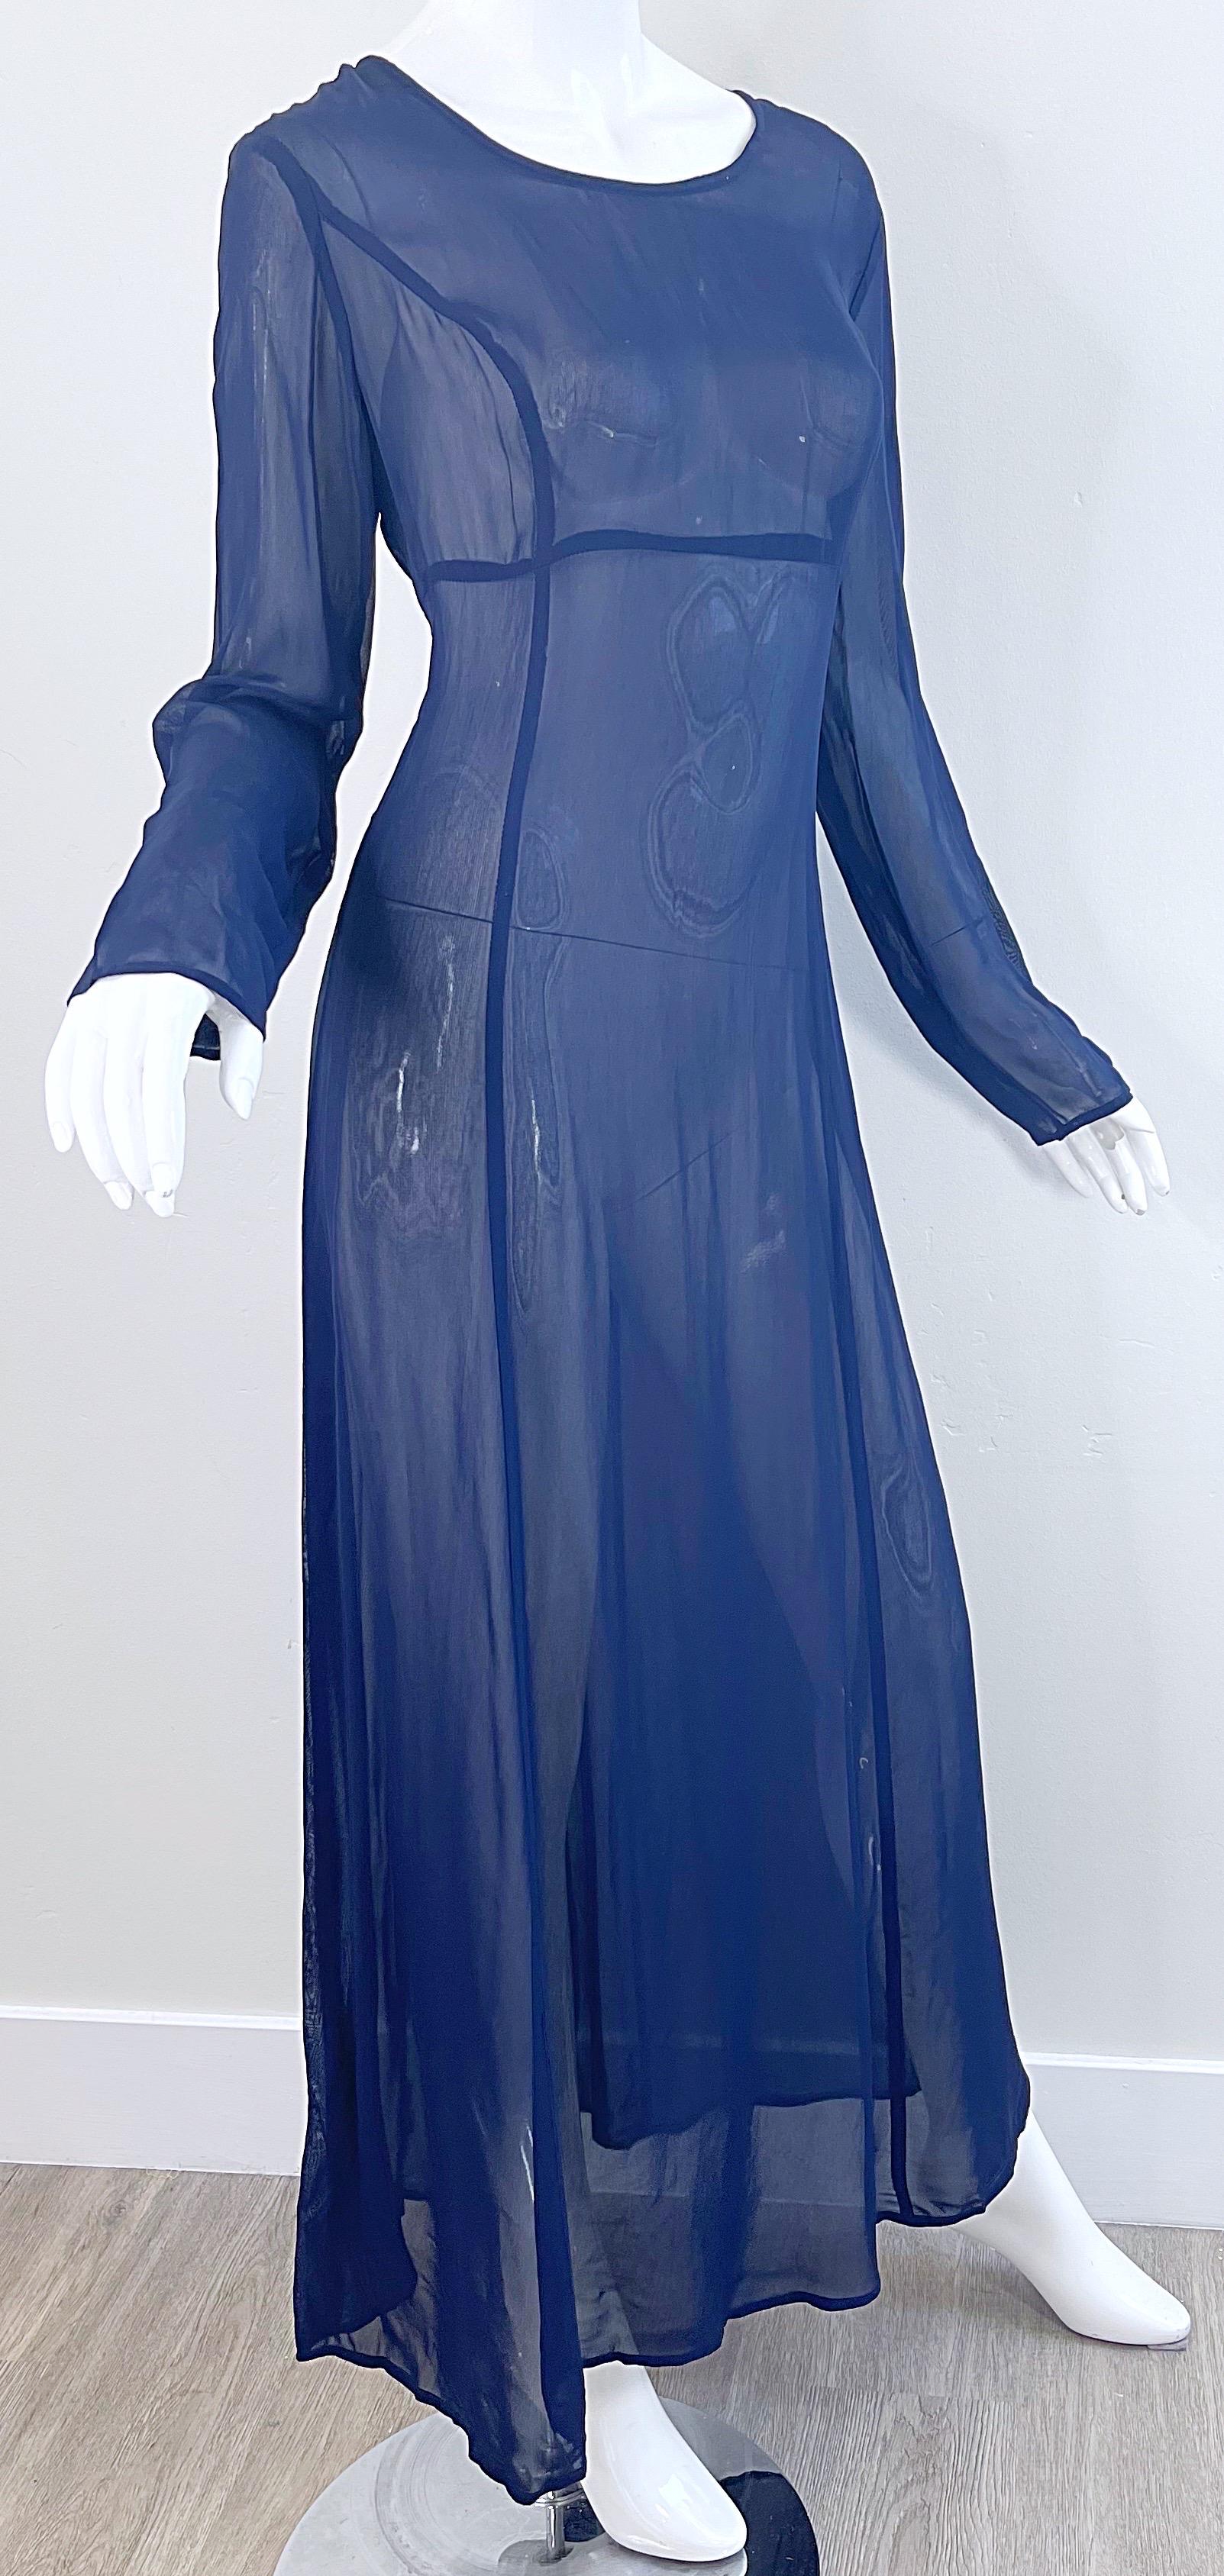 NWT 1990s I Magnin Size 10 Sheer Navy Blue Long Sleeve Vintage 90s Maxi Dress For Sale 2